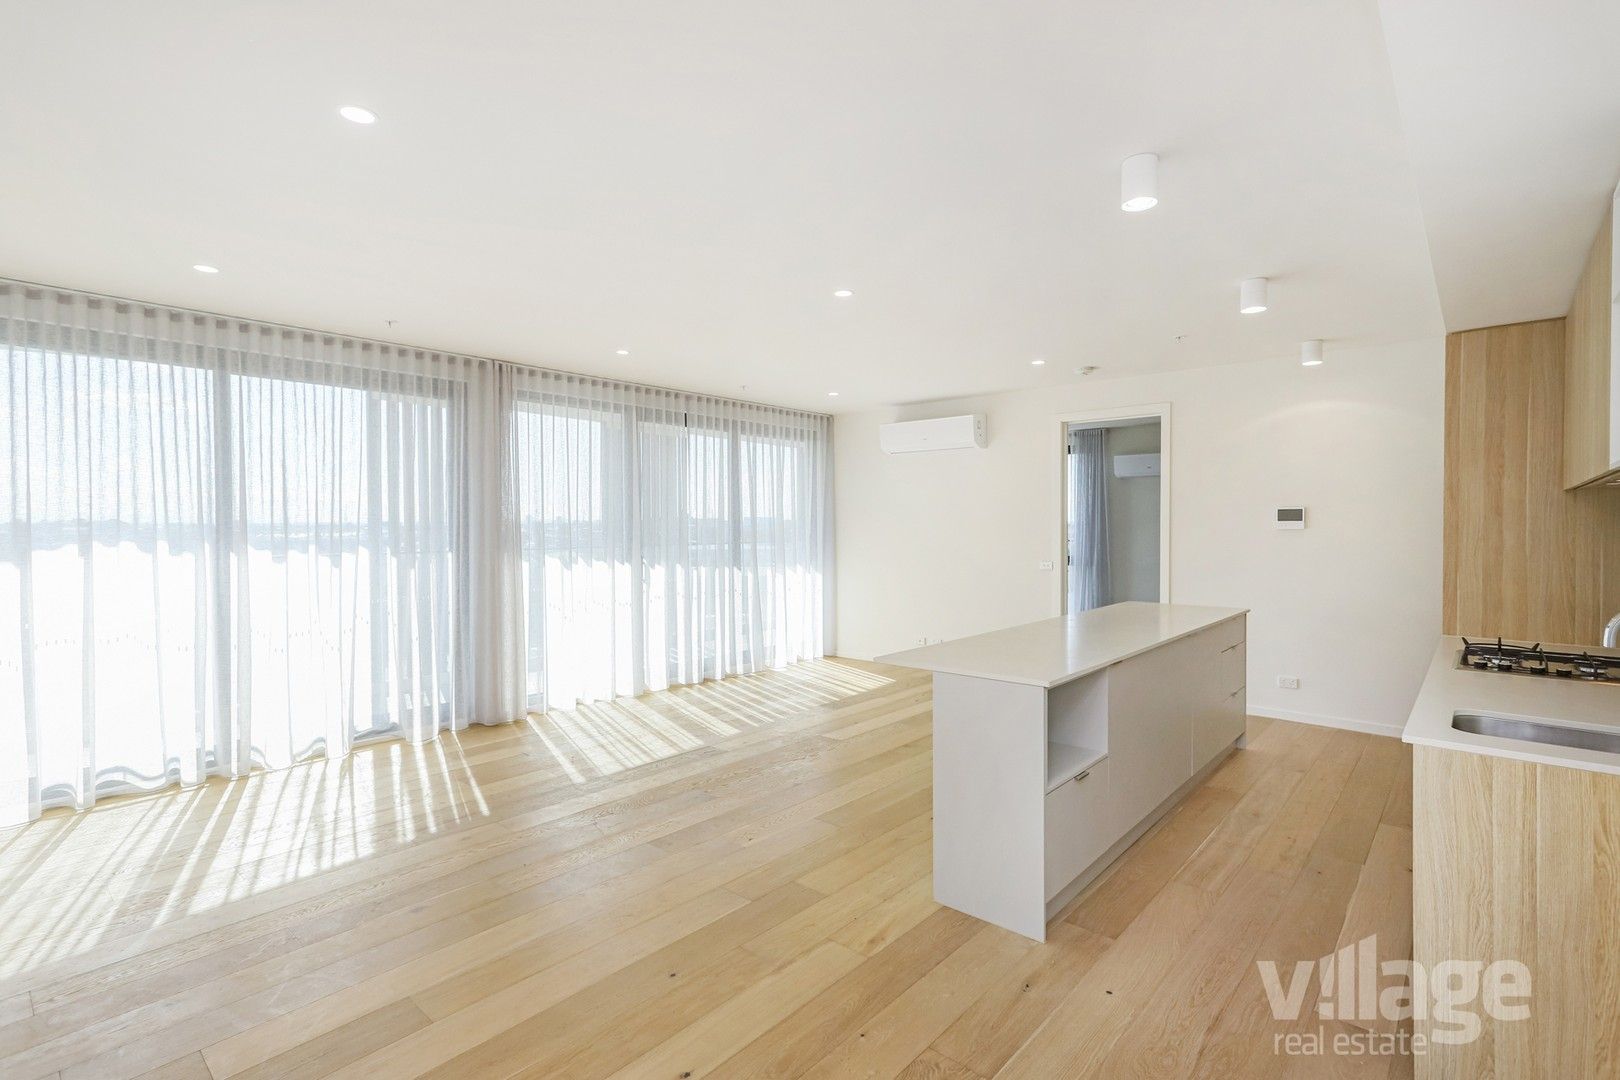 2 bedrooms Apartment / Unit / Flat in 502/2b Williamstown Road KINGSVILLE VIC, 3012